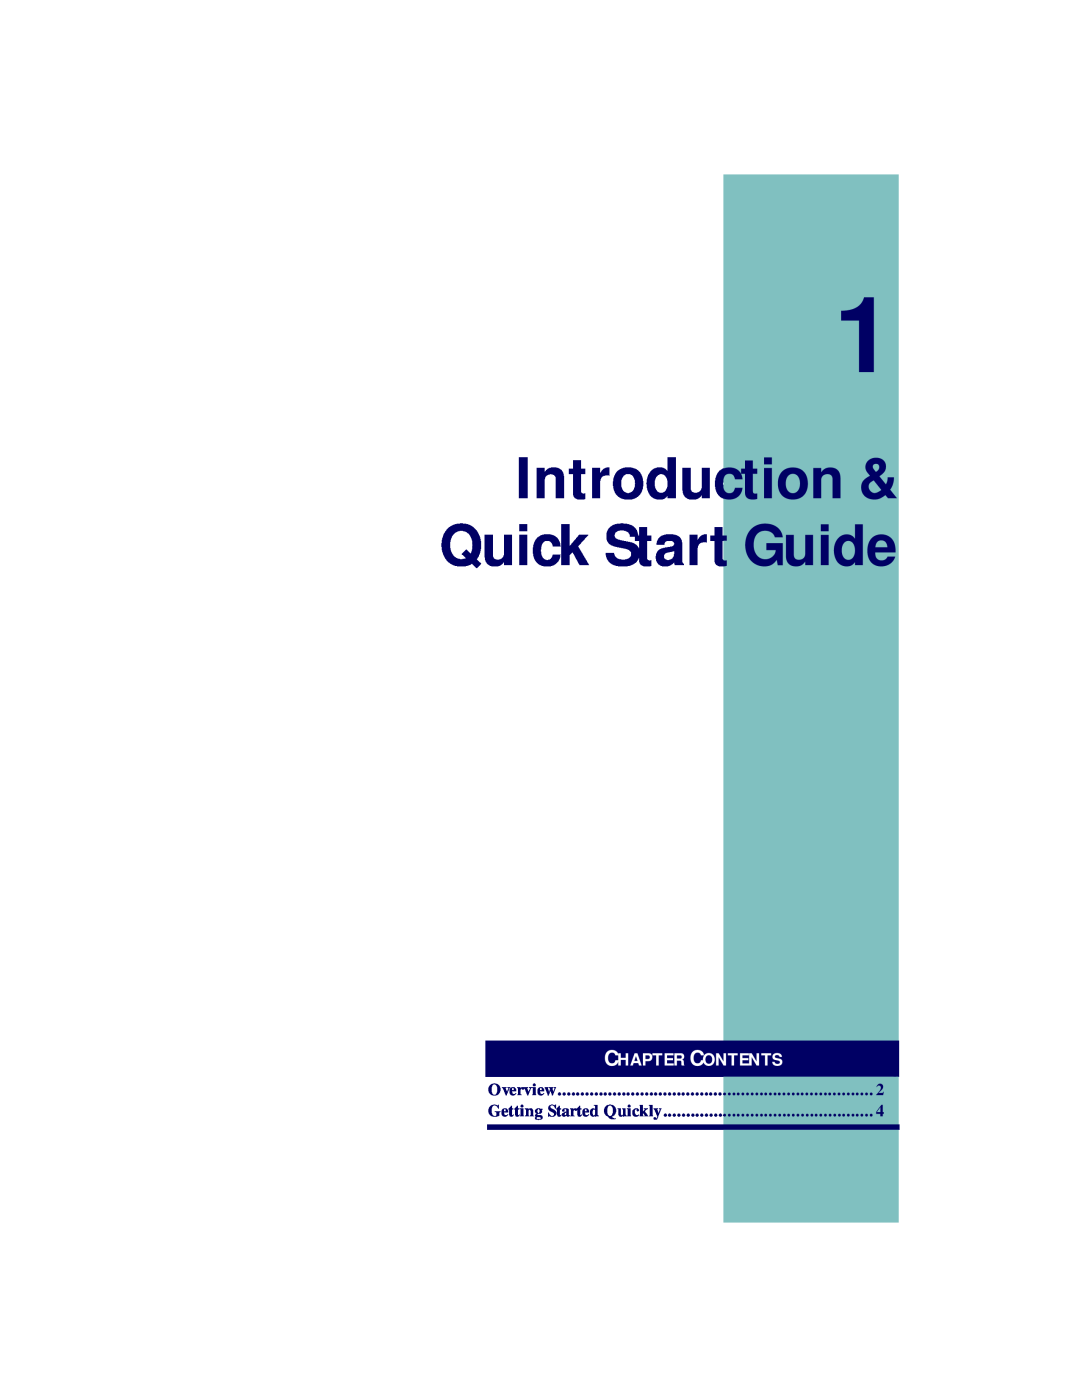 PSC PT2000, TopGun manual Introduction & Quick Start Guide, Chapter Contents, Overview, Getting Started Quickly 